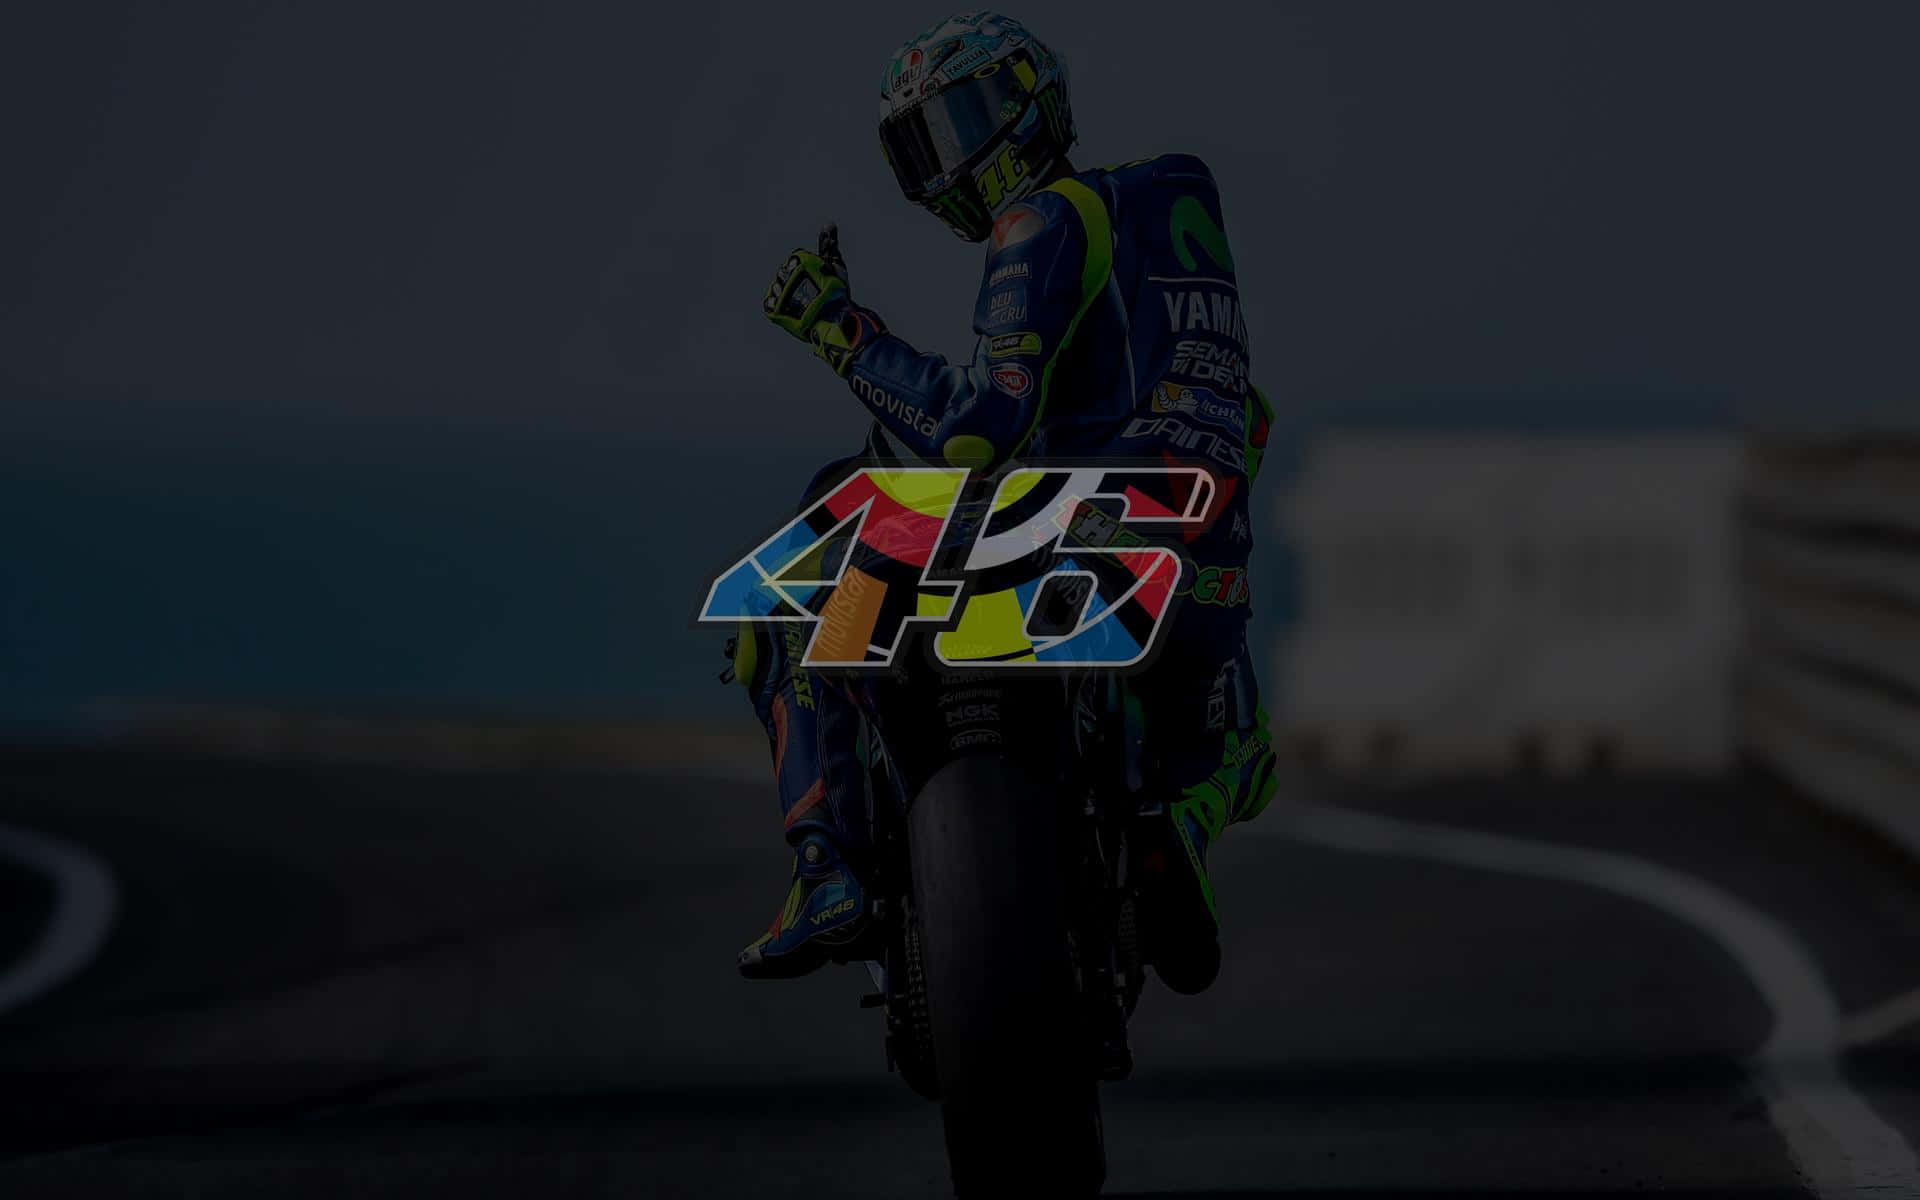 Vr46 Valentino Rossi's Racing Number